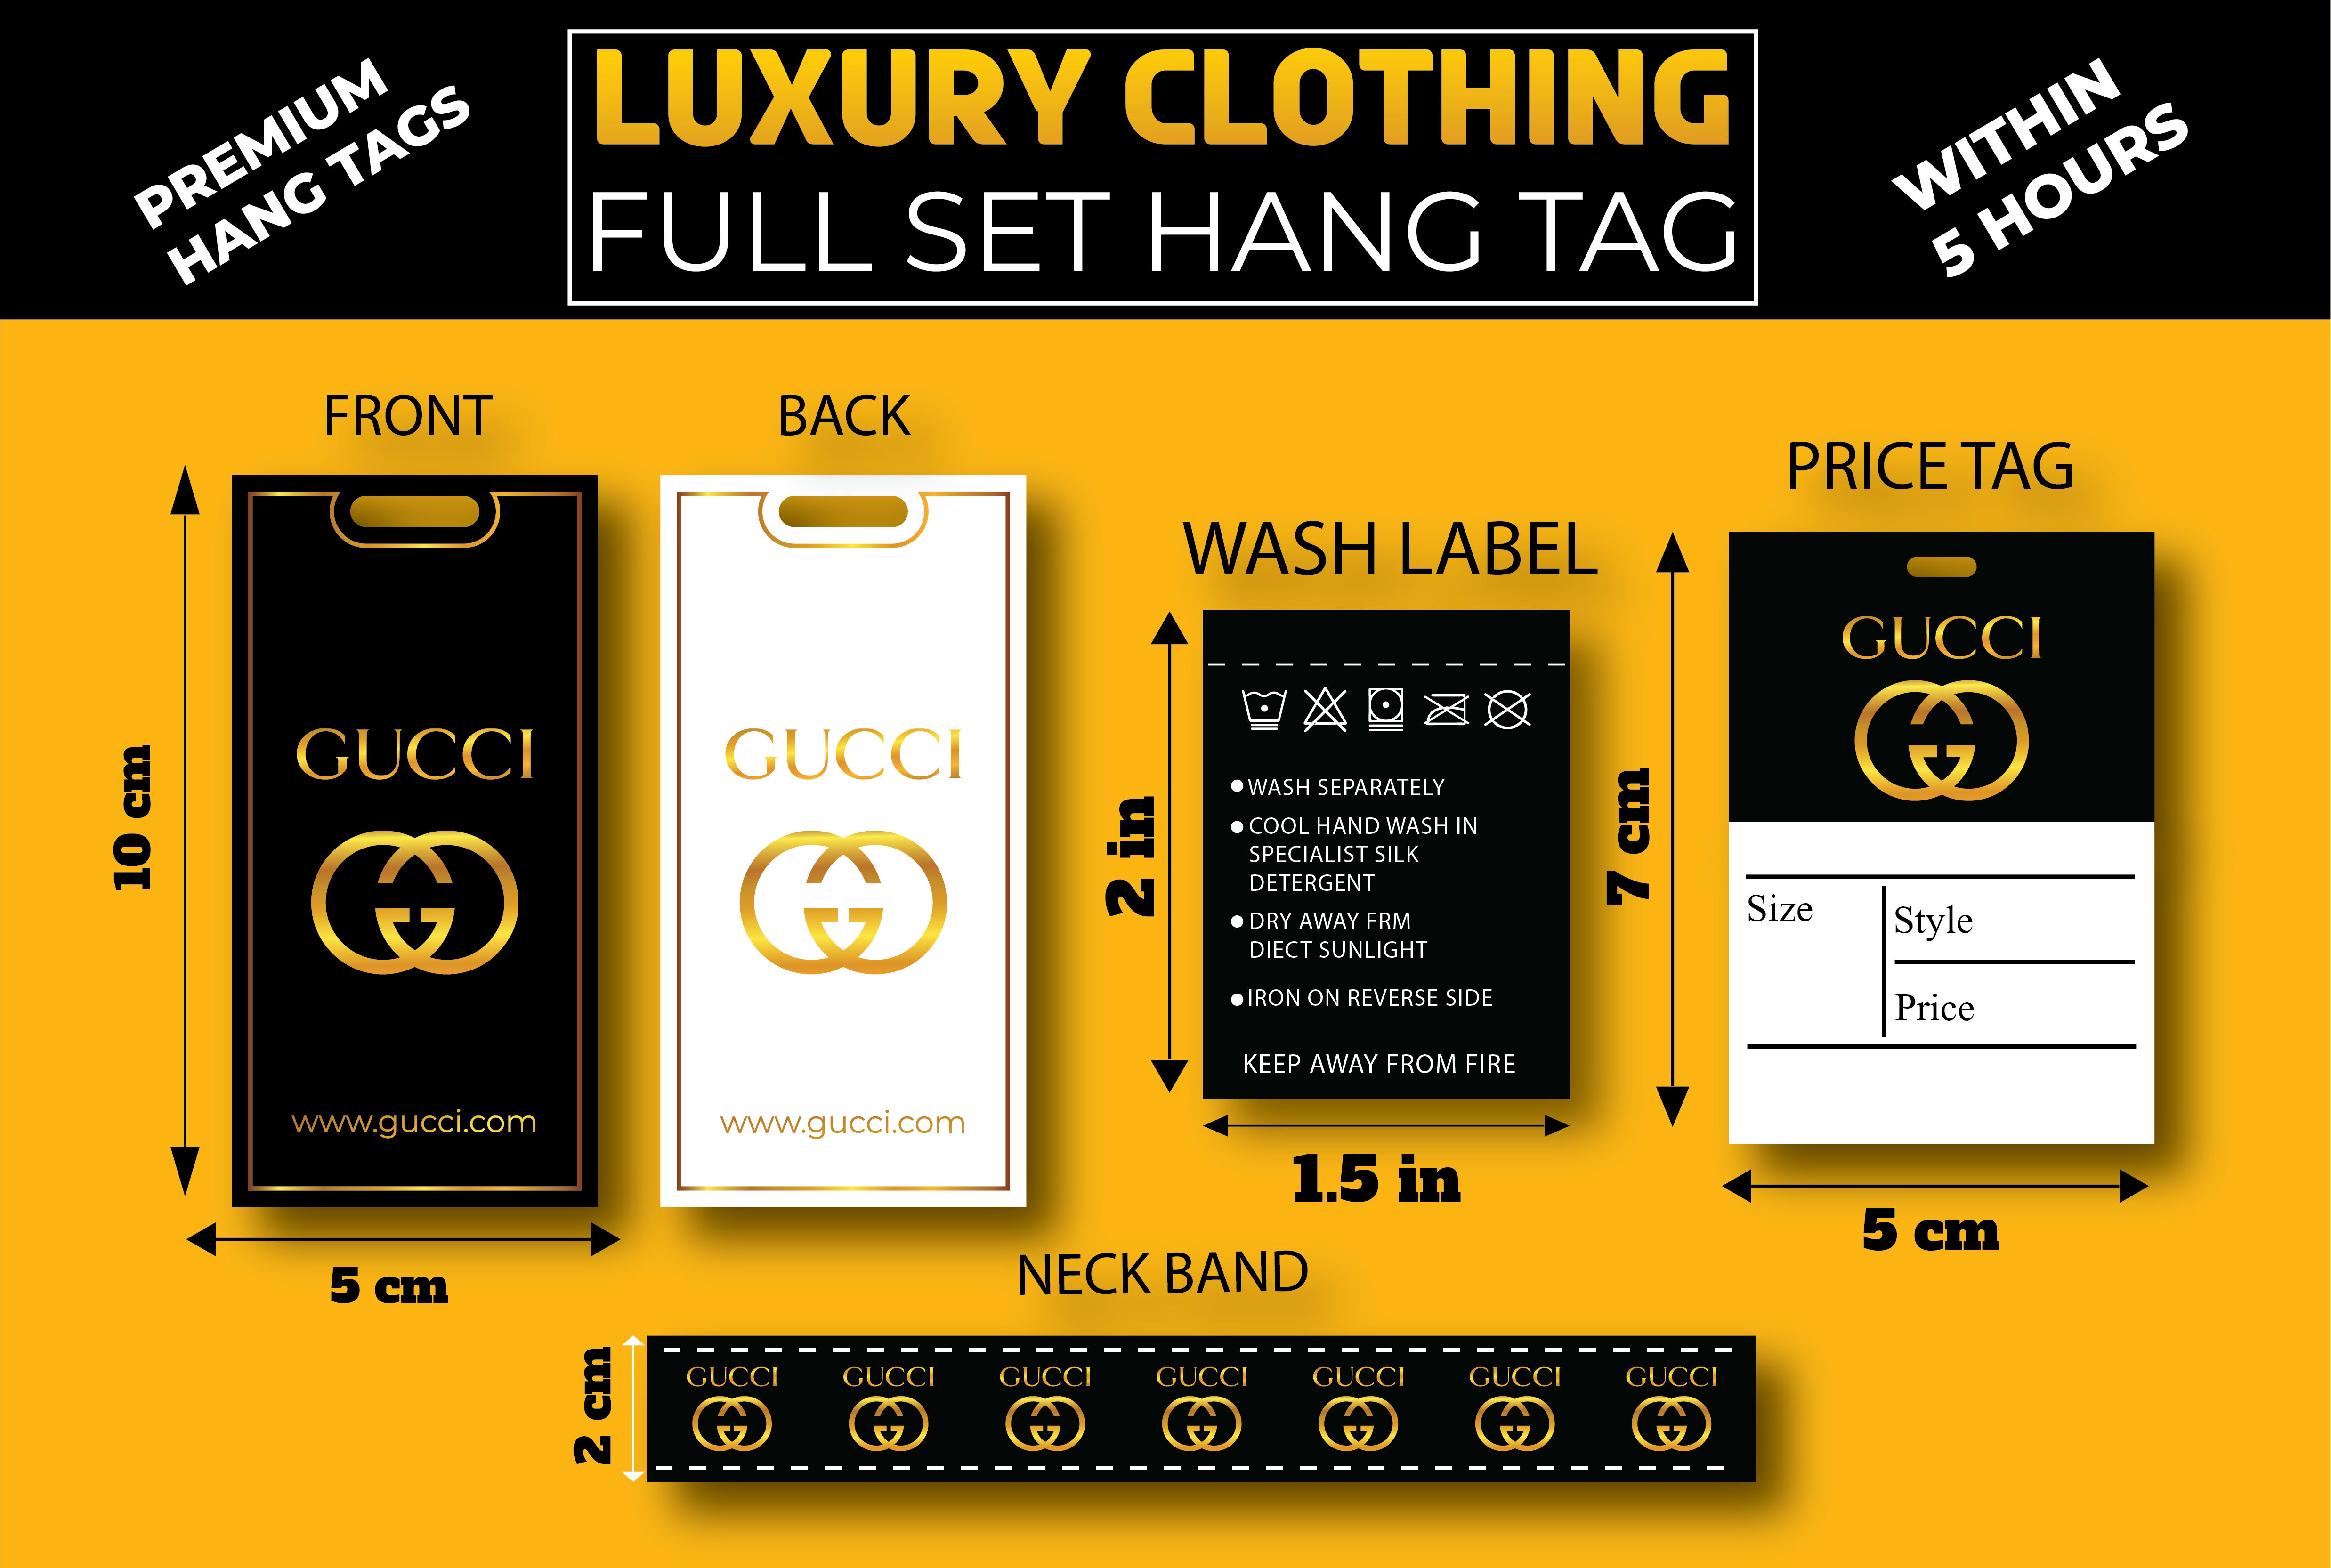 Authentic Brand New Gucci Hang Tag Care Cards